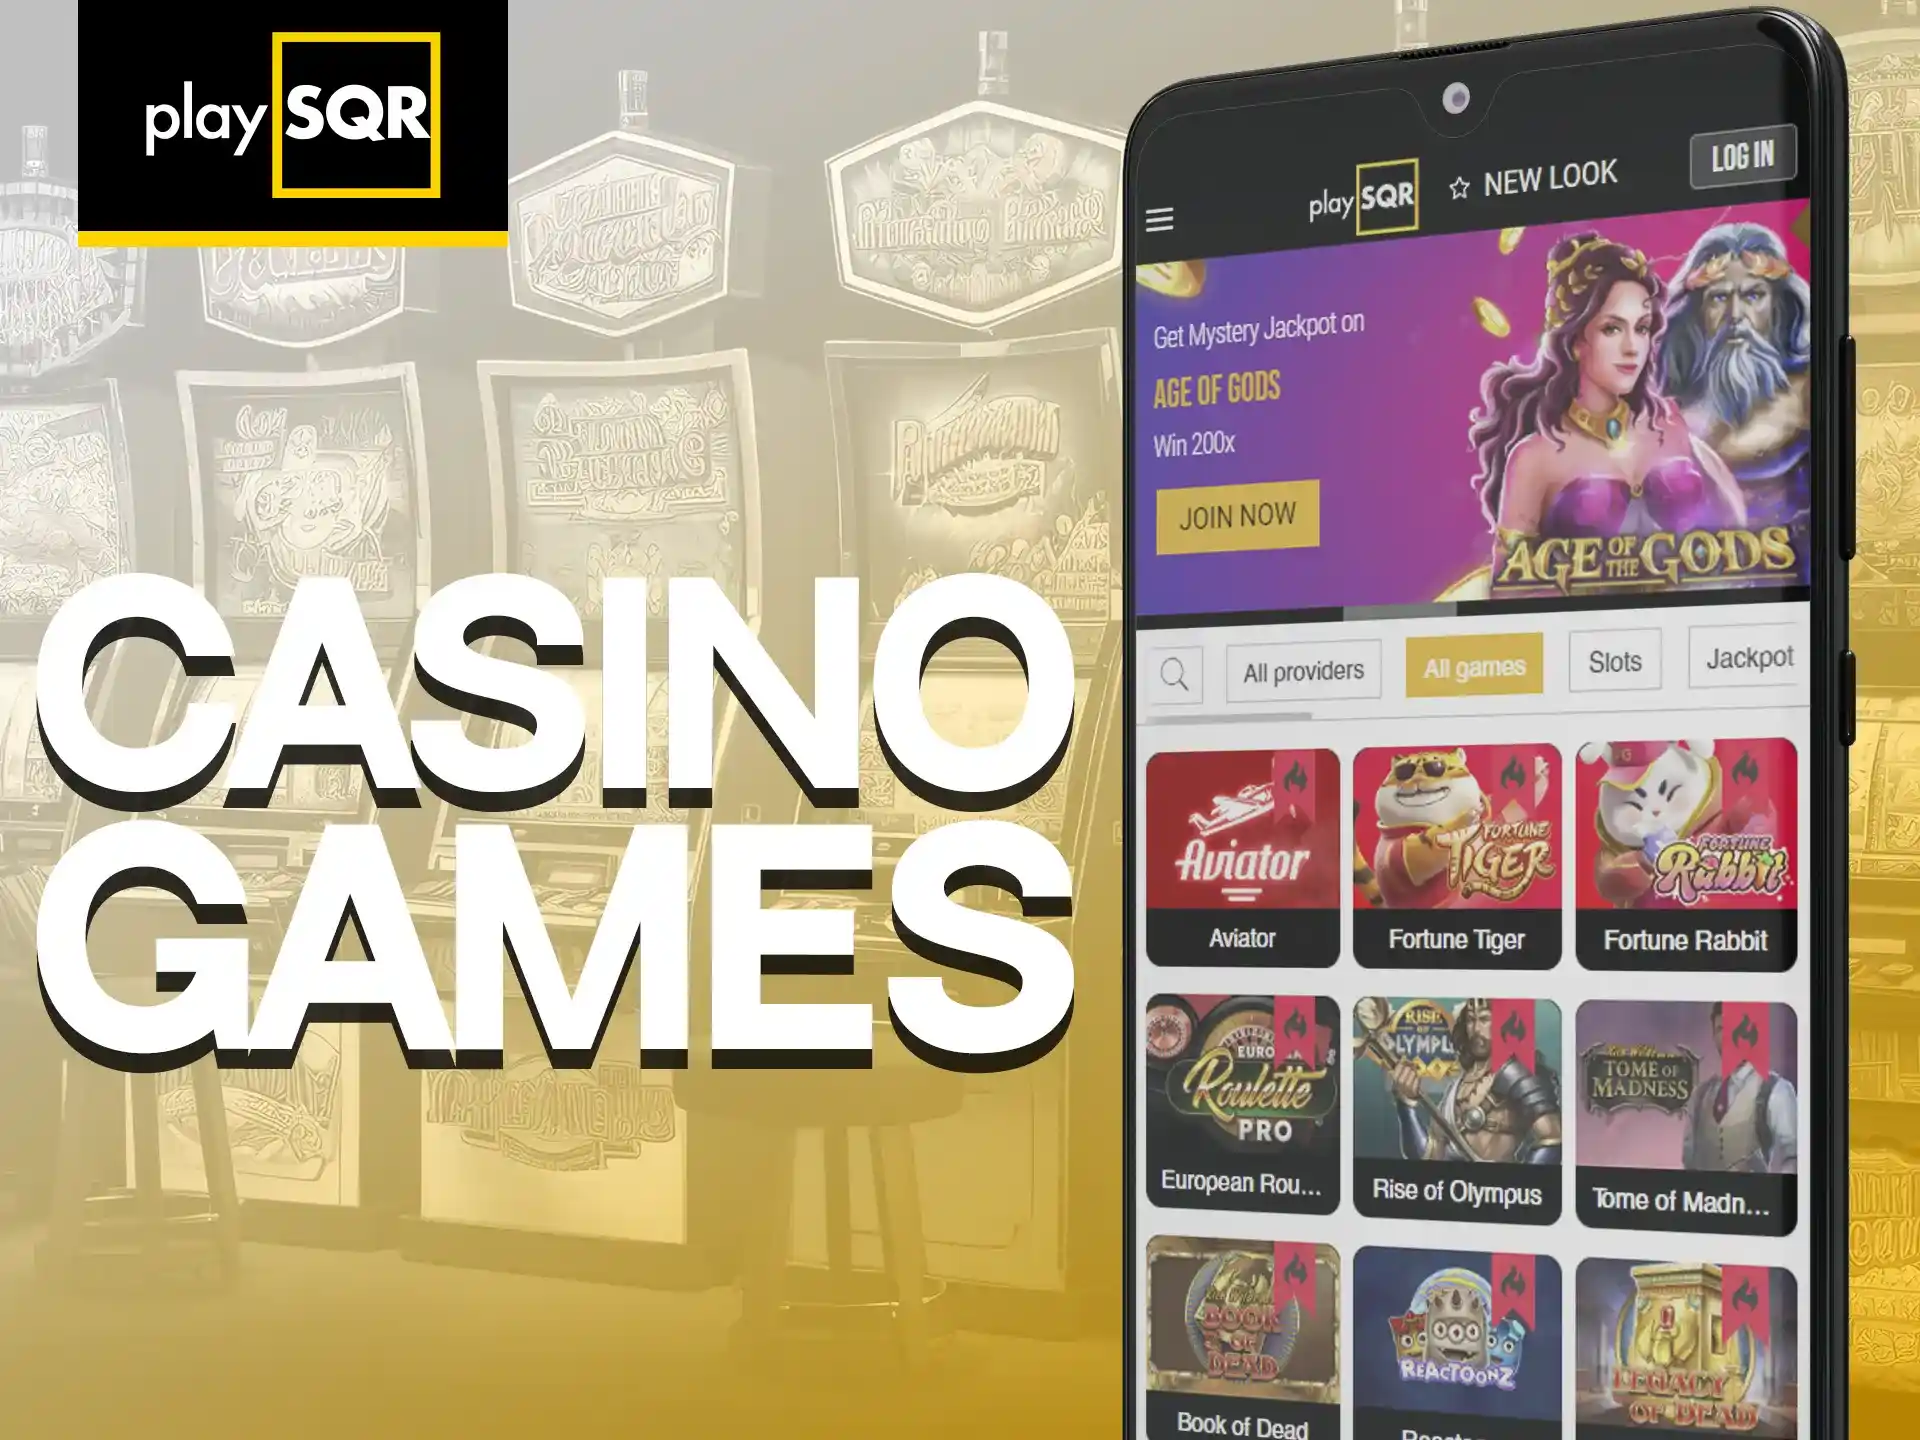 You can play traditional casino table games, slots and roulette on the PlaySQR app.